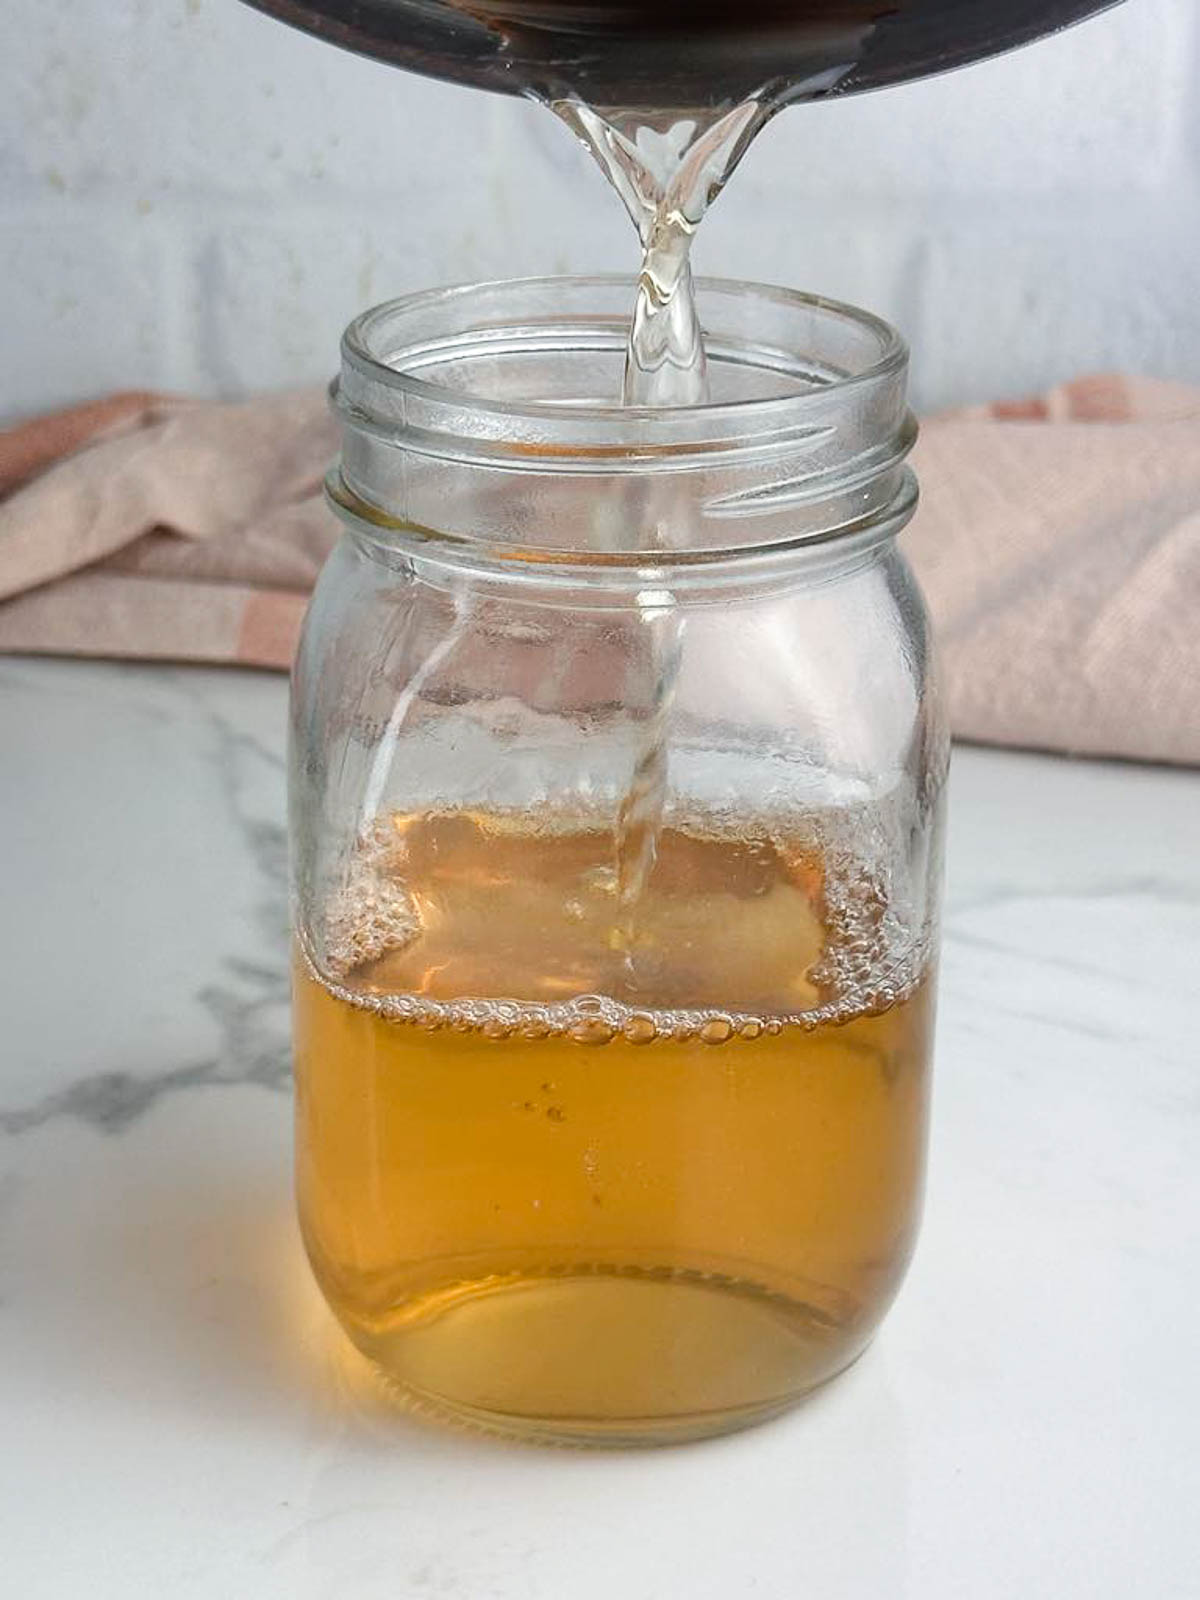 Pour the vanilla simple syrup into a jar for easy storage.